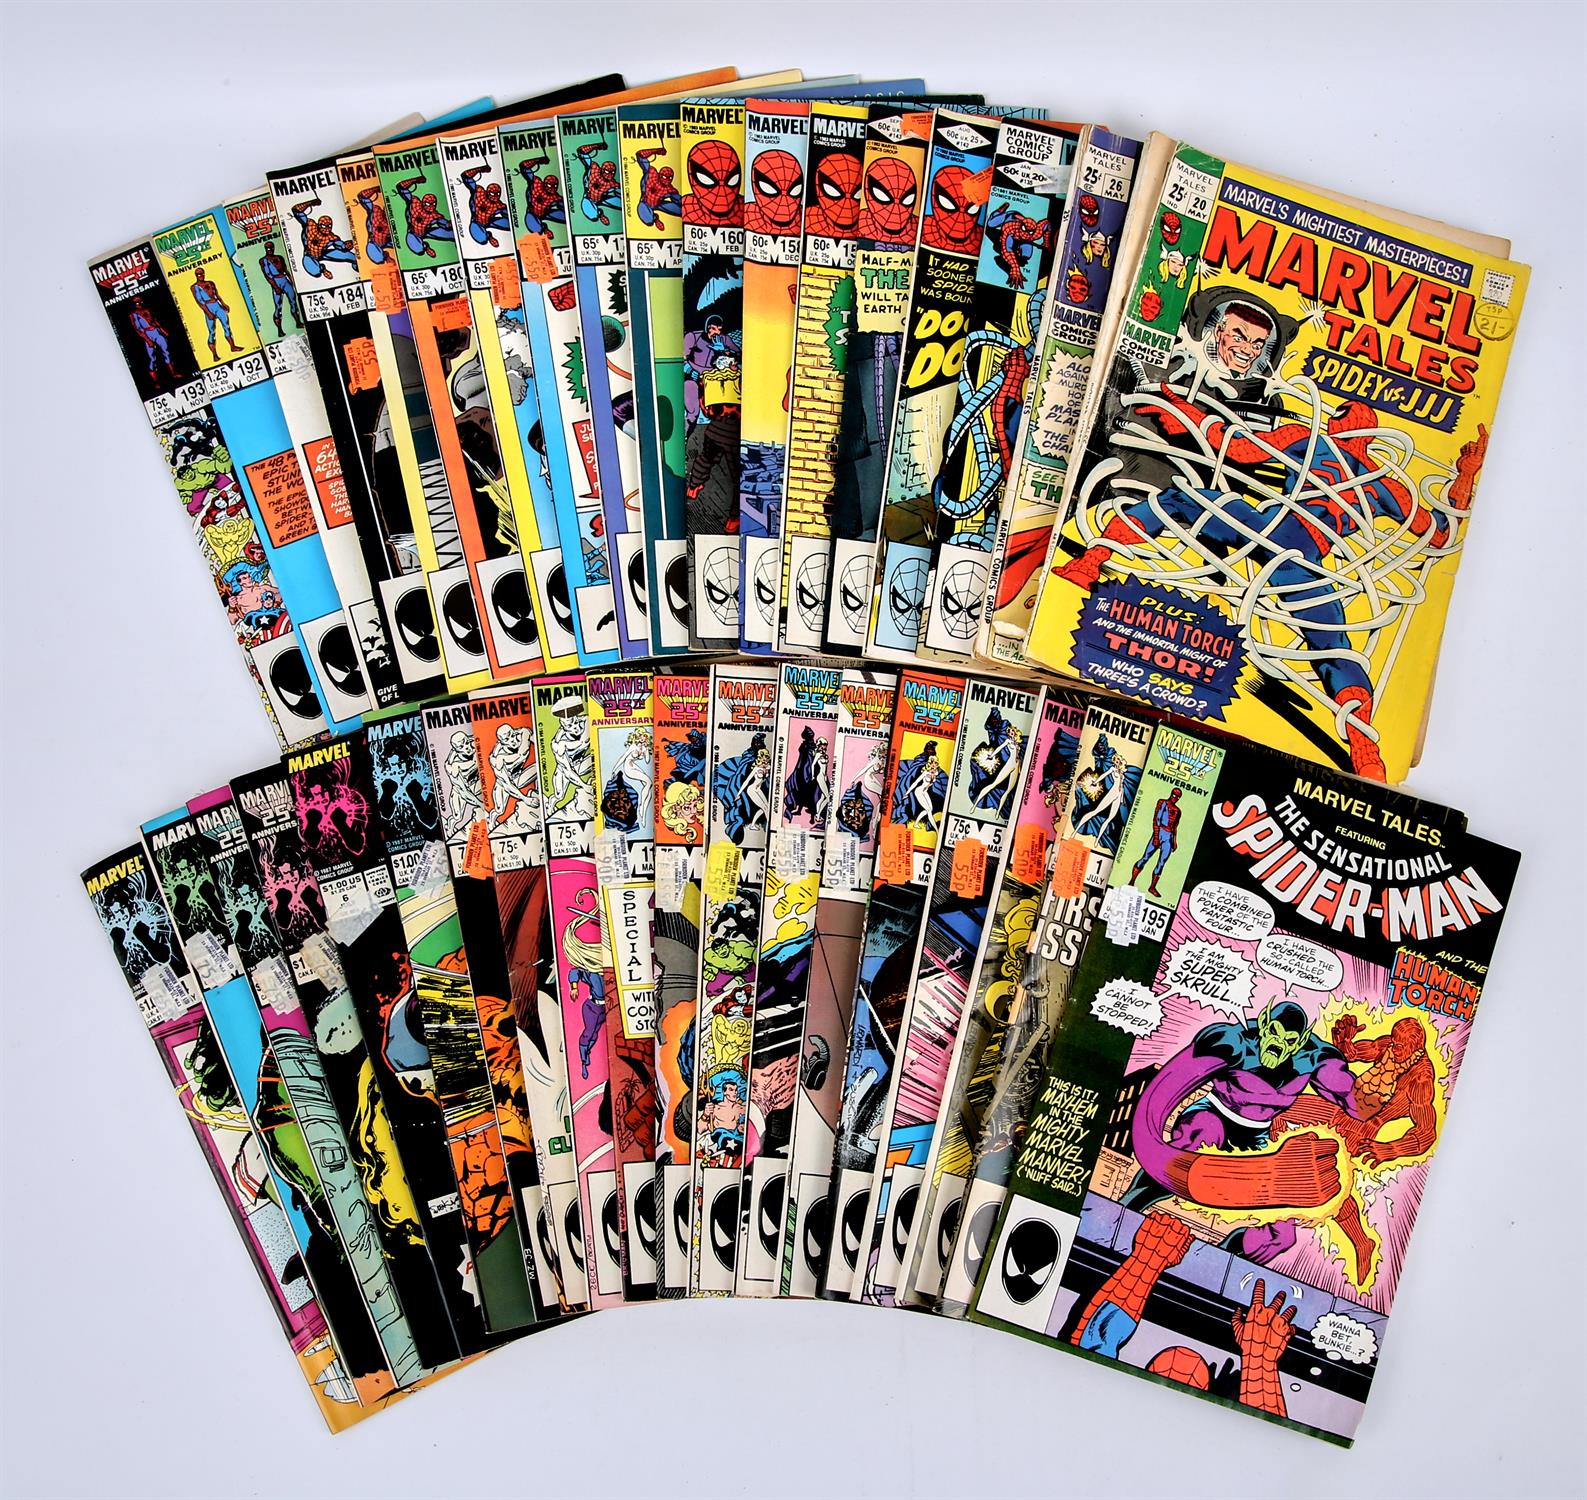 Marvel Comics: Marvel Tales and Mixed titles. 40 issues (1969s onwards). Marvel Tales featured many